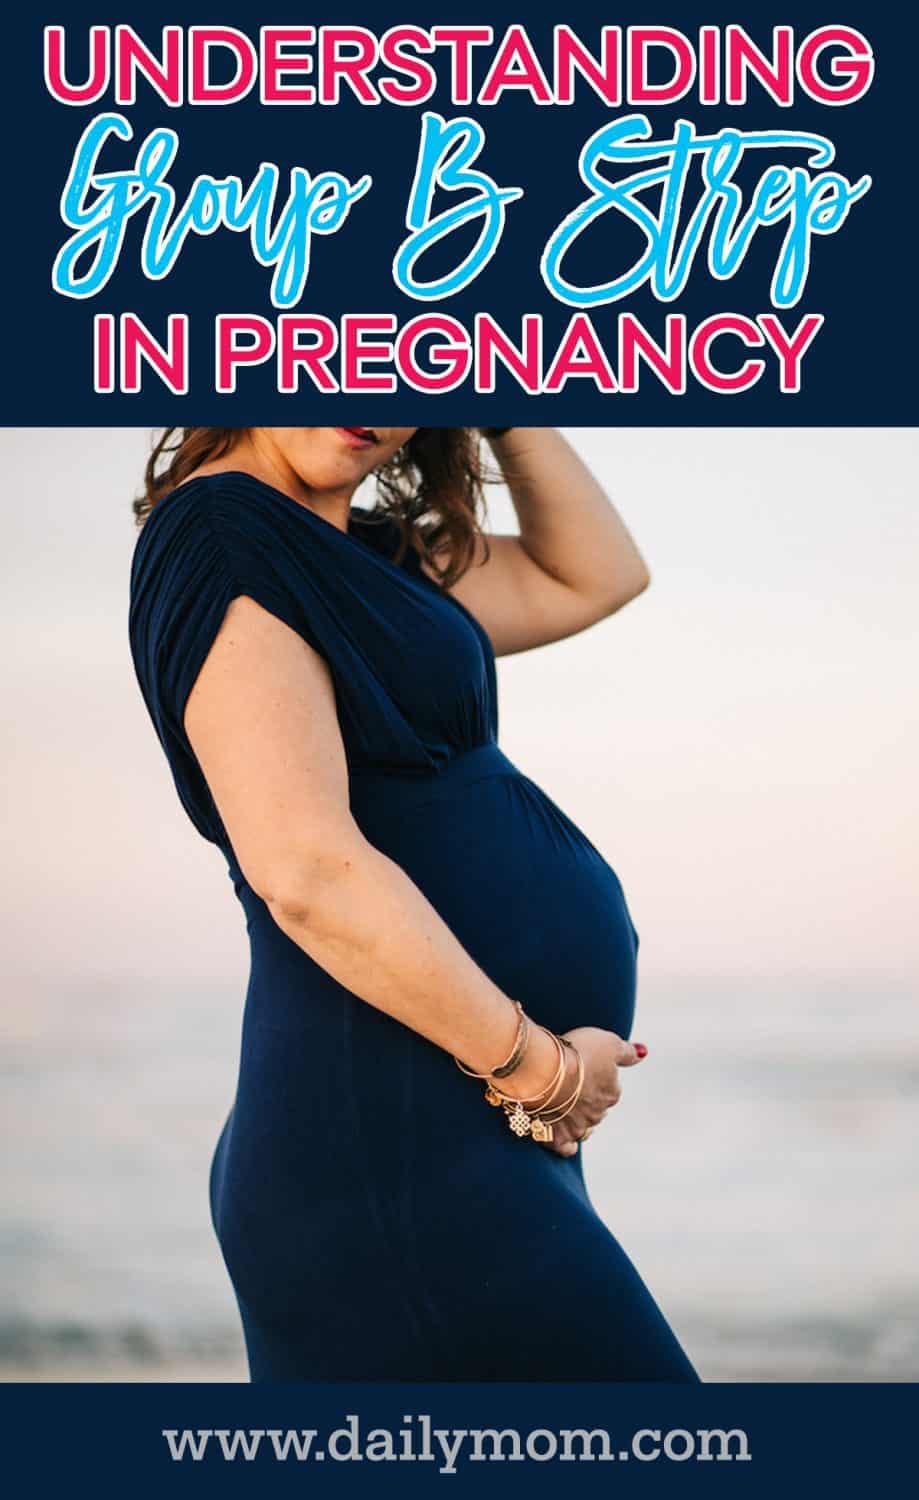 Understanding Group B Strep In Pregnancy 1 Daily Mom, Magazine For Families